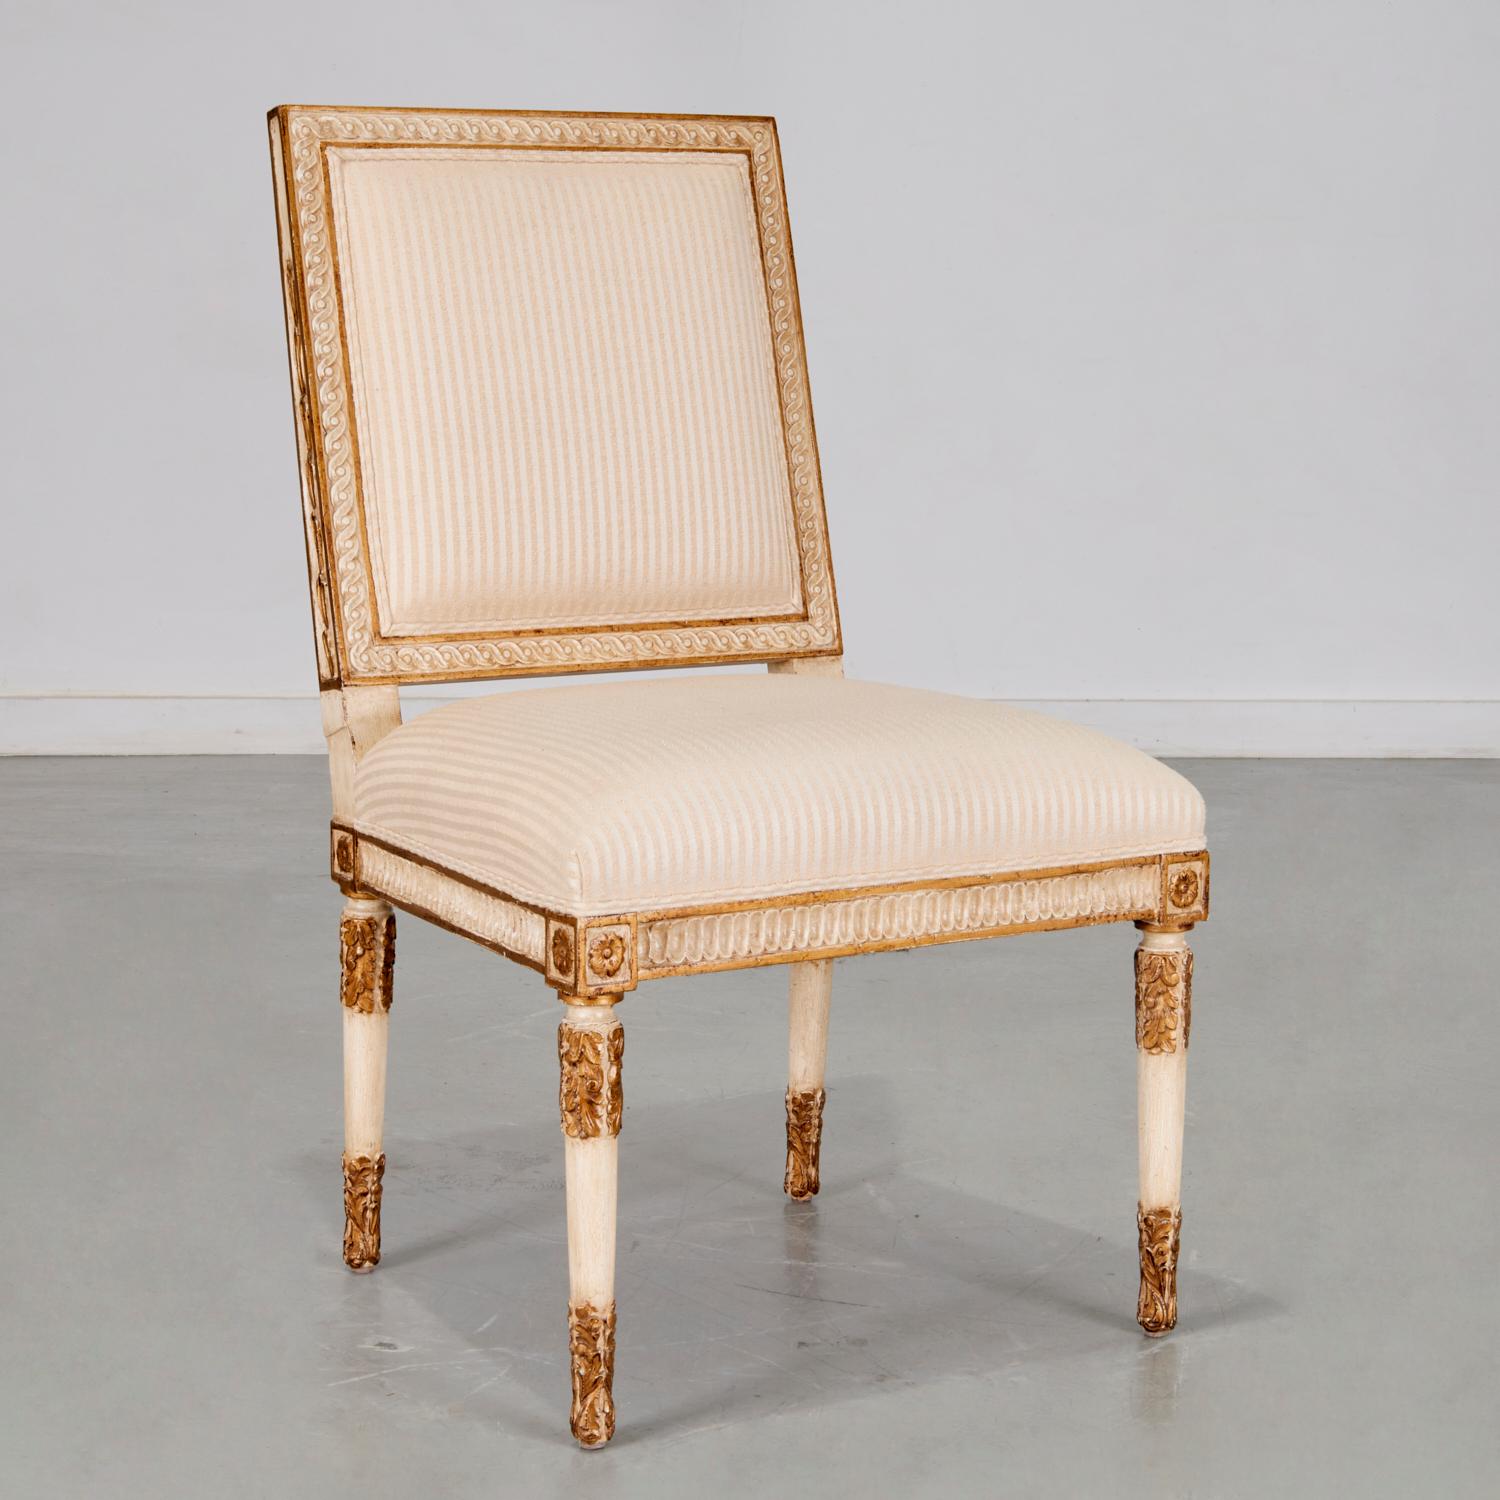 Italian Neoclassical Style Slipper Chair with Cream and Gold Painted Accents For Sale 1